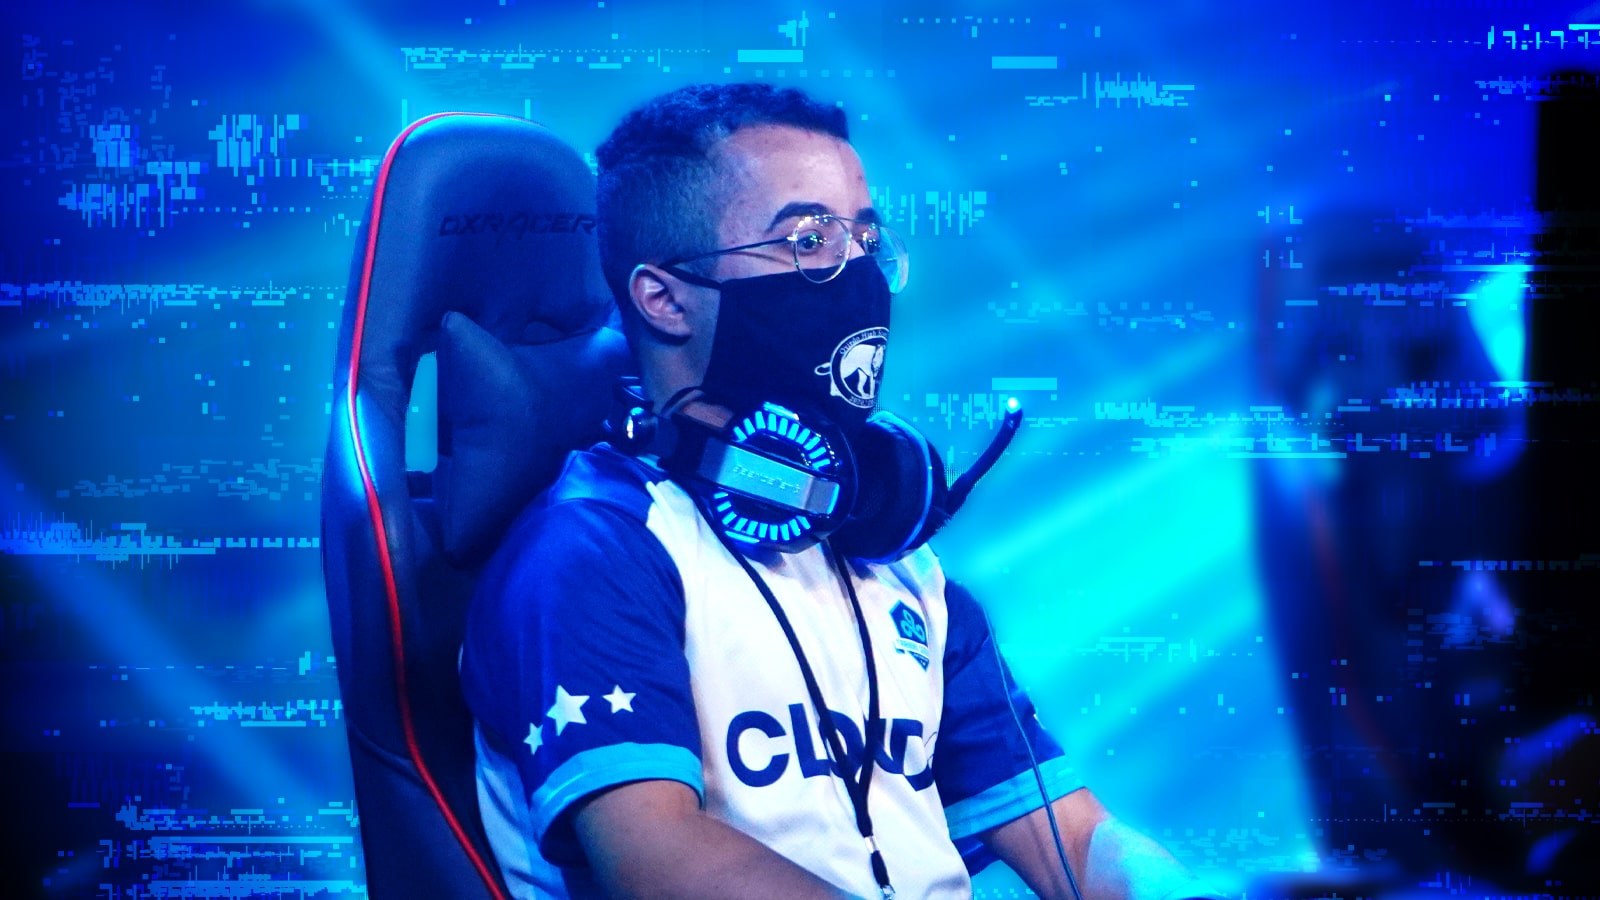 Hector Santos, a young man with short brown hair wearing silver wireframe glasses, a Cloud 9 esports jersey in blue and white, a black face covering, and a gaming headset around his neck, is seated in a gray and orange gaming chair in front of a large blue LED screen on stage at the Fortress.